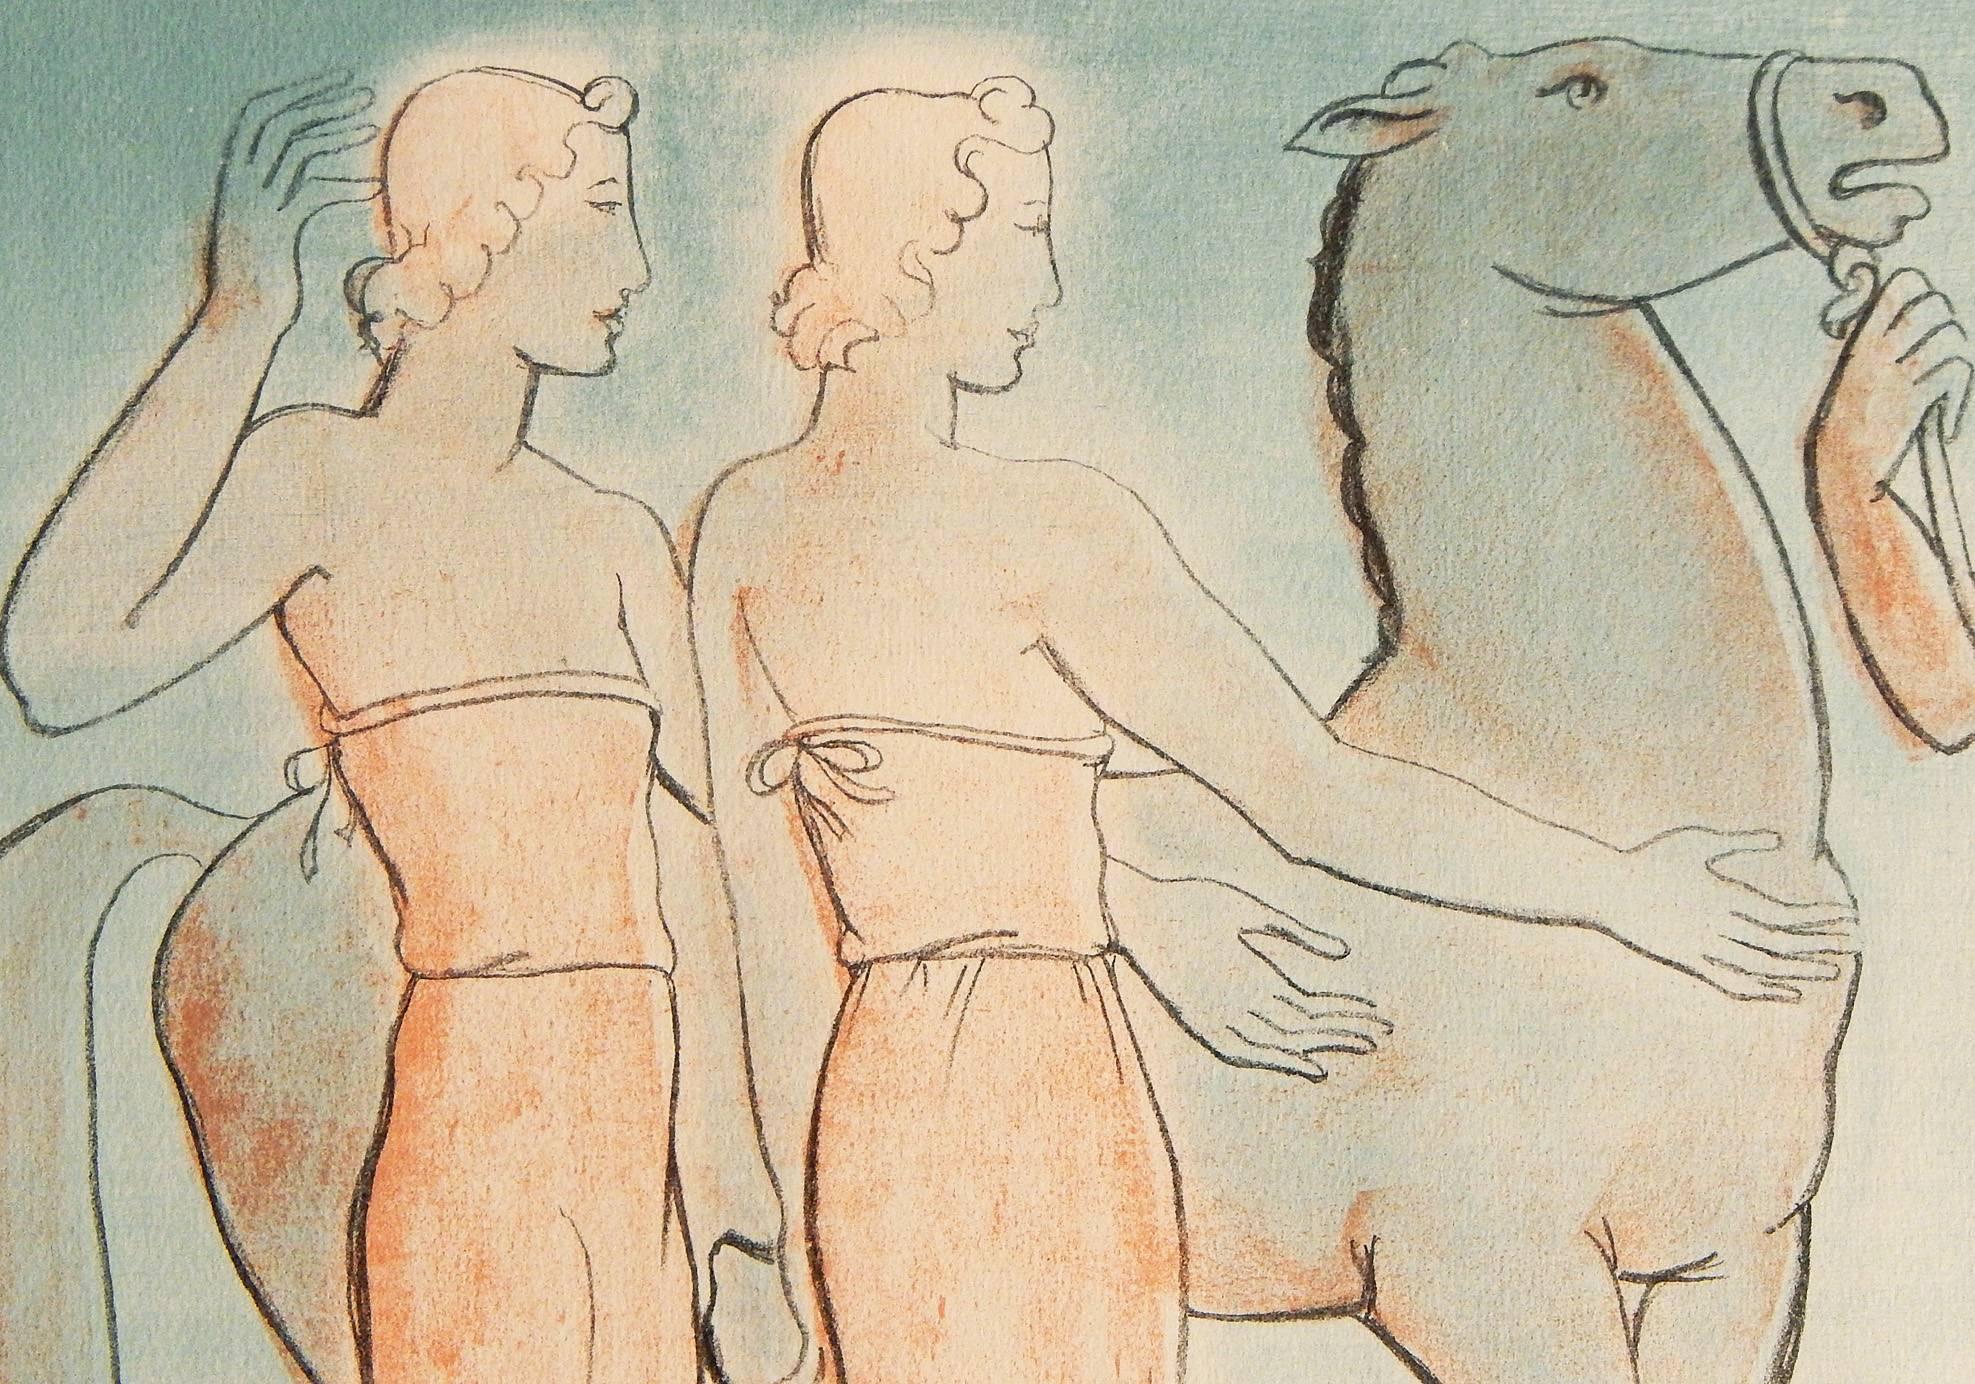 Beautifully composed and subtly colored in hues of pale, pale blue and rusty red, this frieze-like composition features two female figures in Classical Greek robes and a semi-nude male figure holding the reins of a horse.  The watercolor was painted